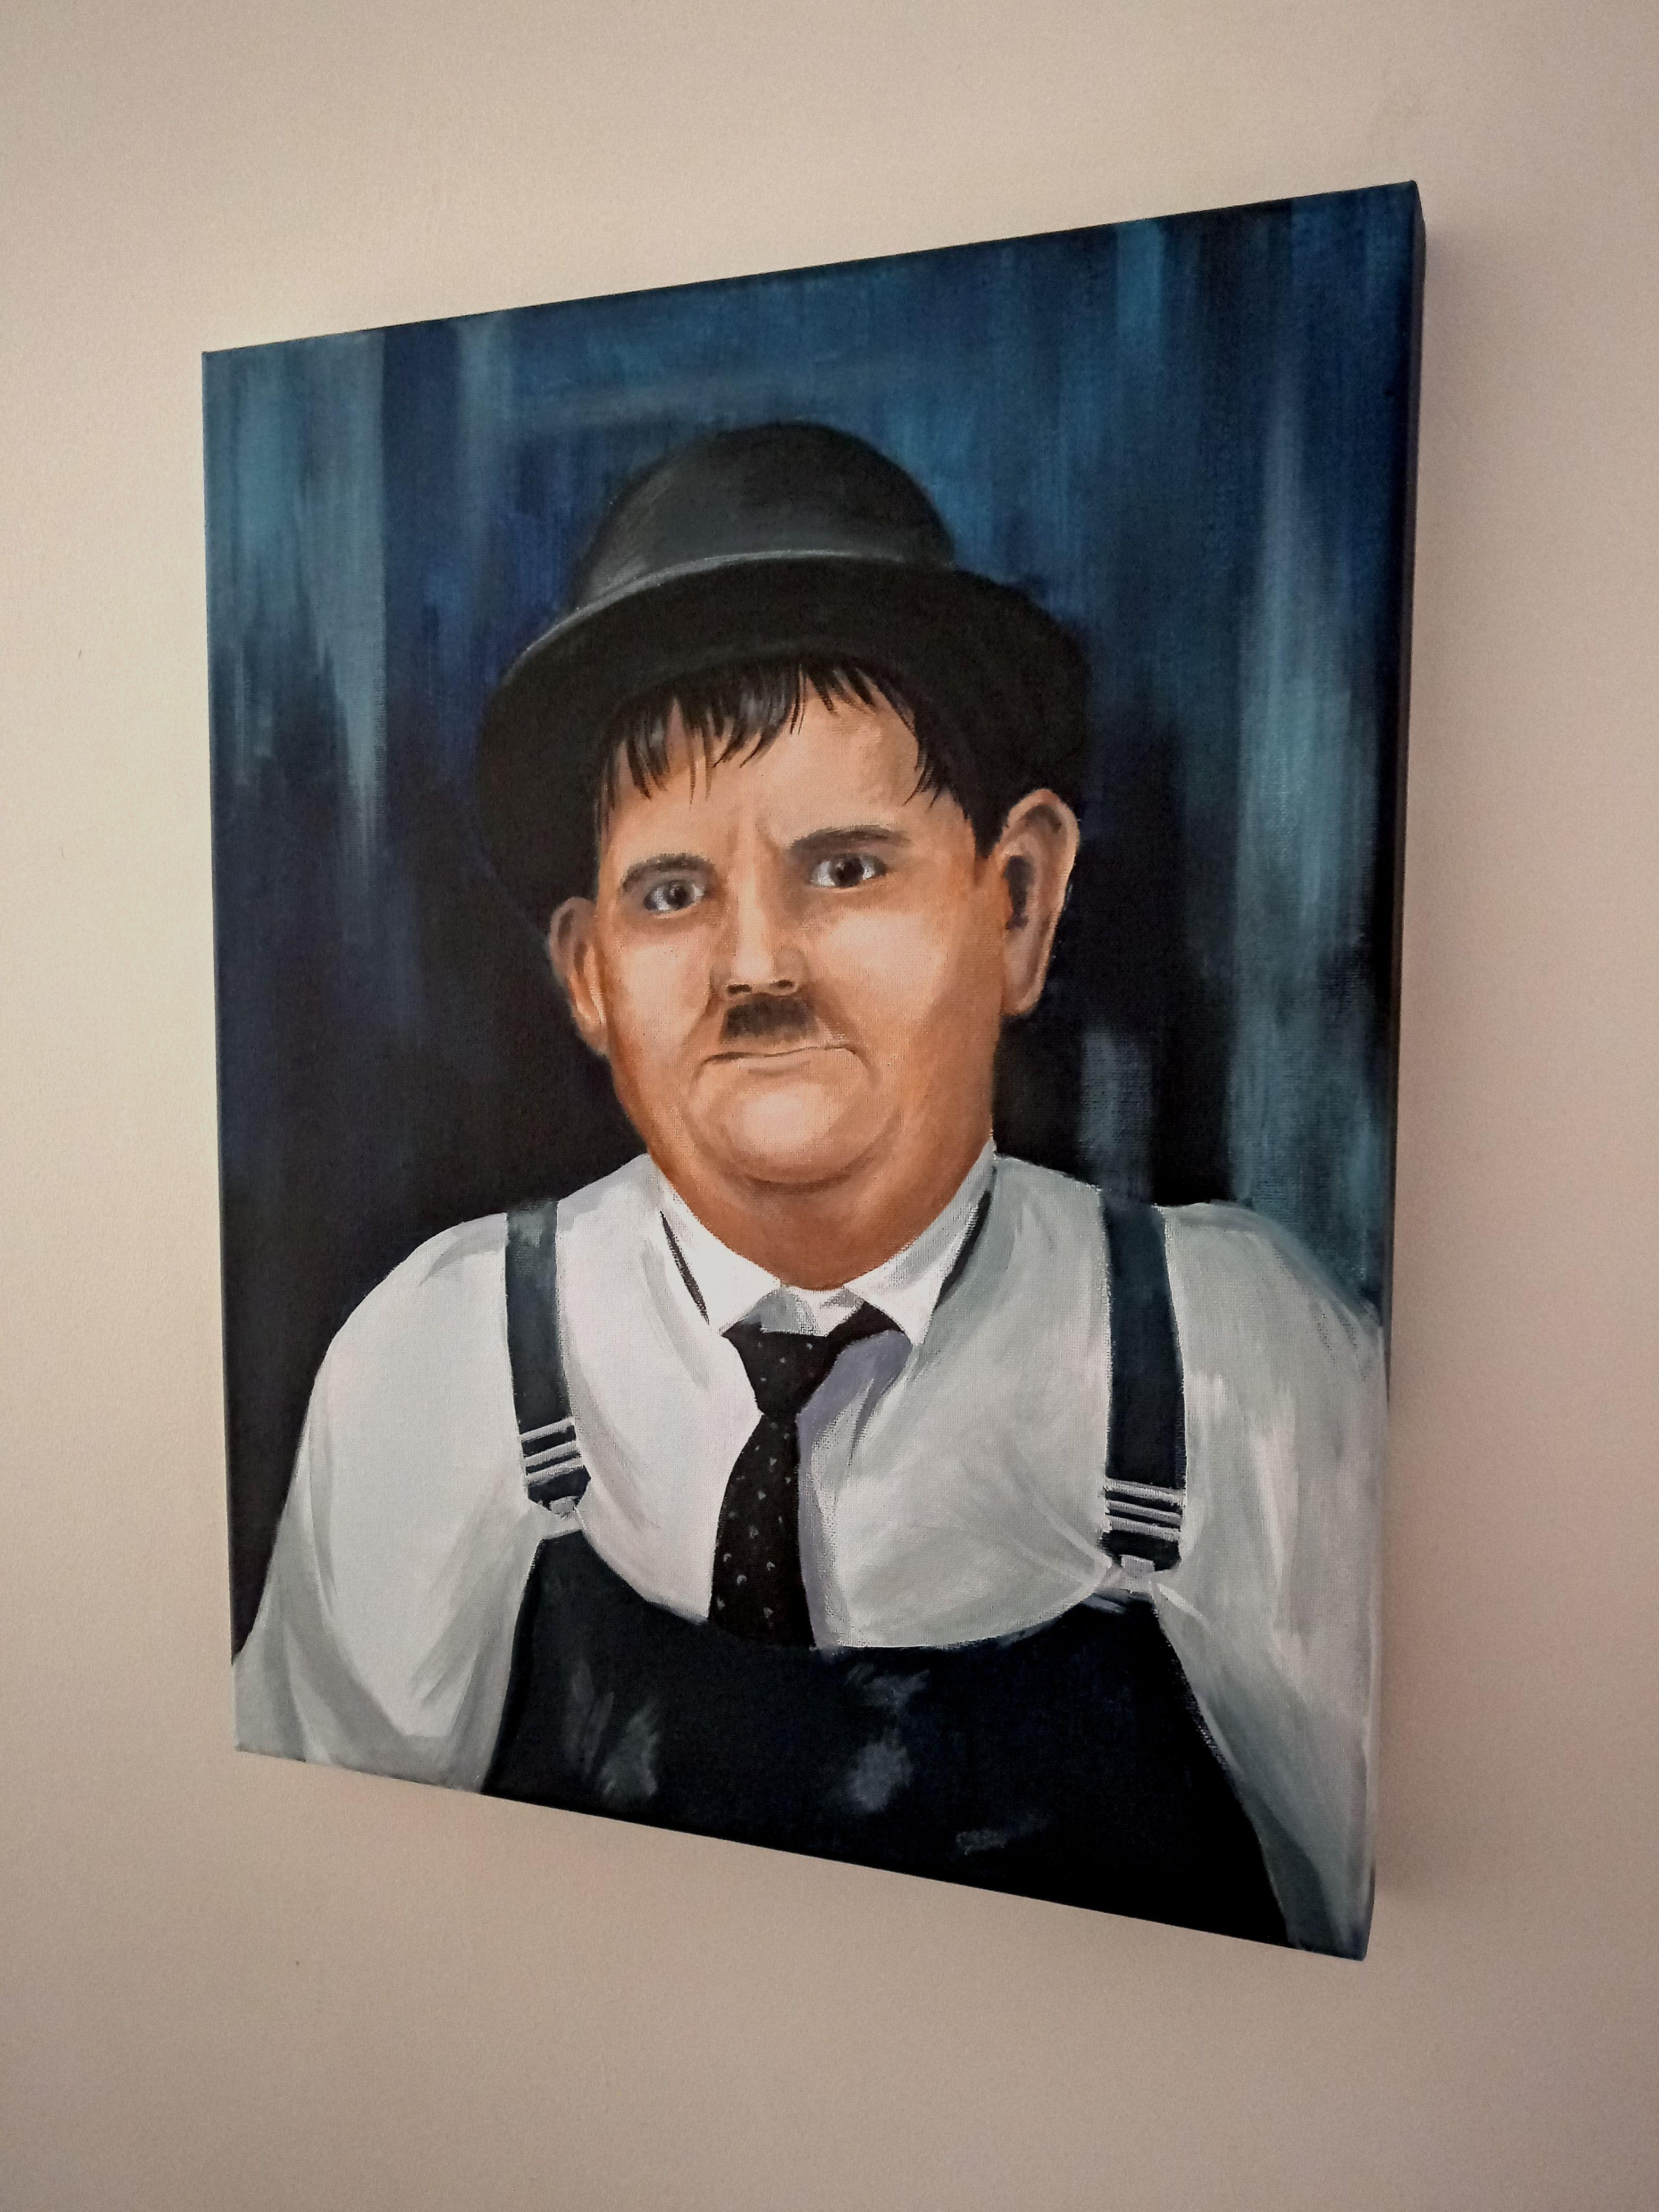 An original acrylic painting of one of Hollywood's best-loved comics, Oliver Hardy.     Unframed stretched canvas measuring 51 x 41 cm with deep painted edges. Signed by the artist in the bottom right hand corner and carefully packaged and sent with